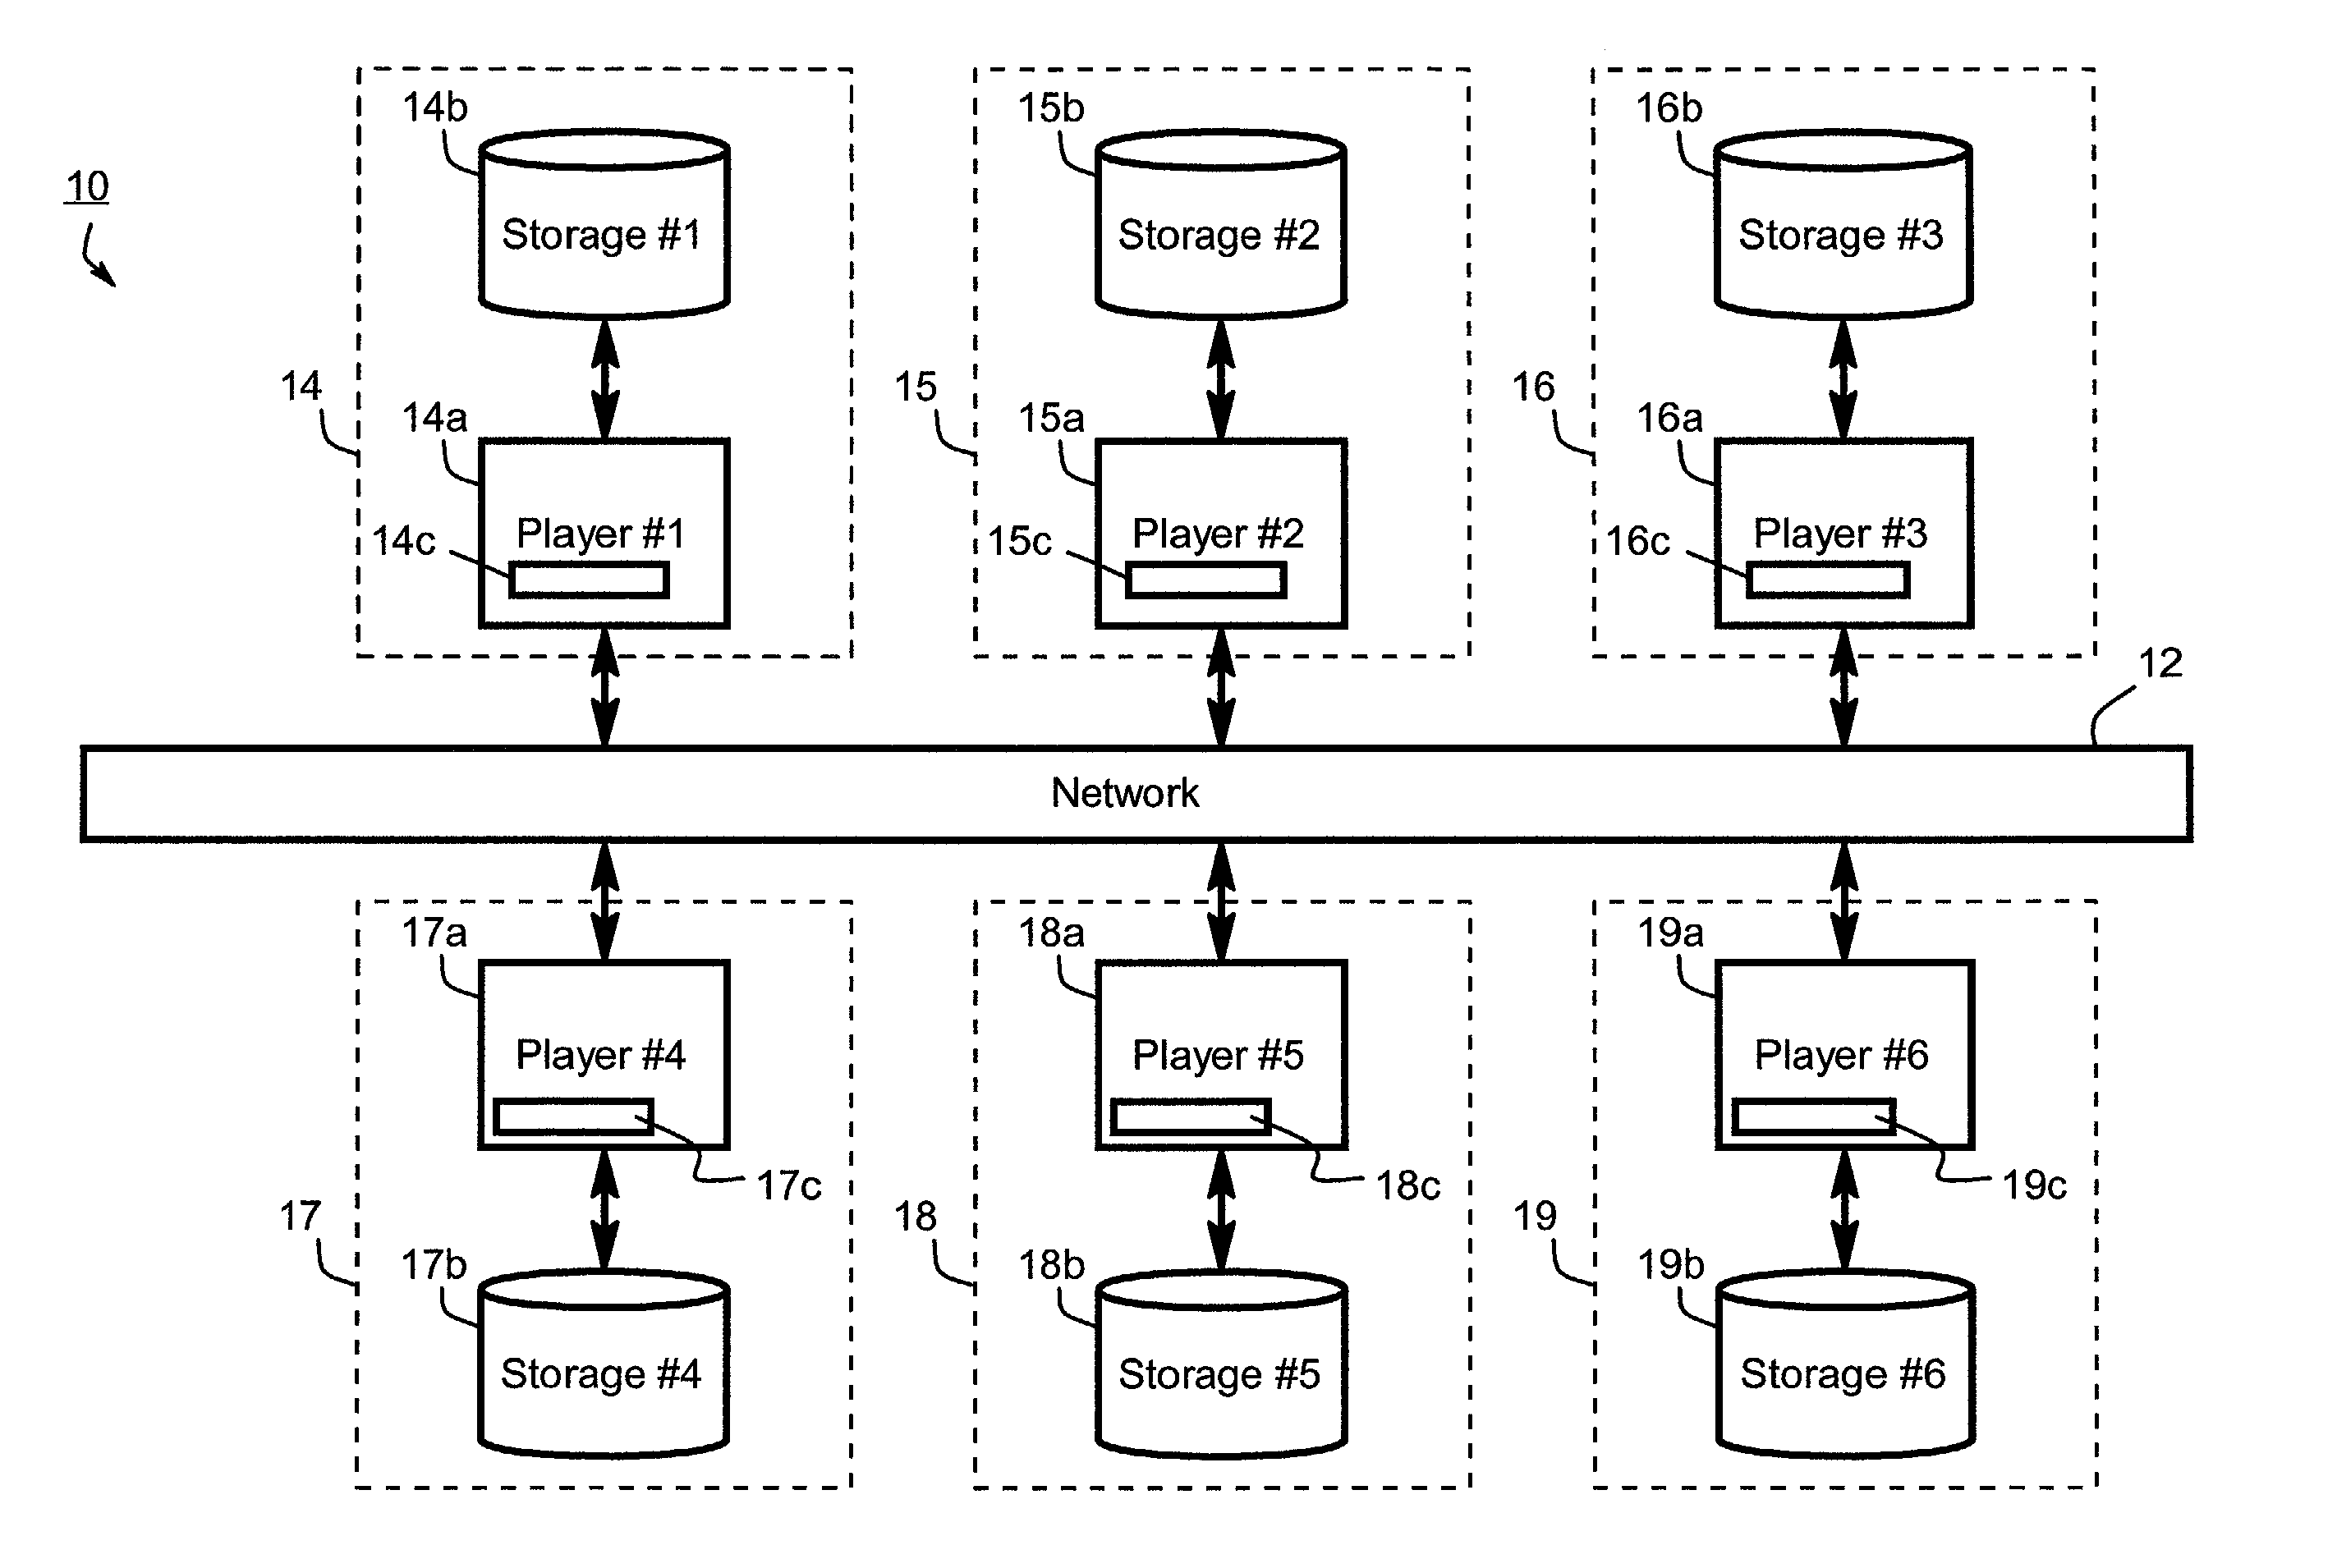 Distributed storage of audio/video content